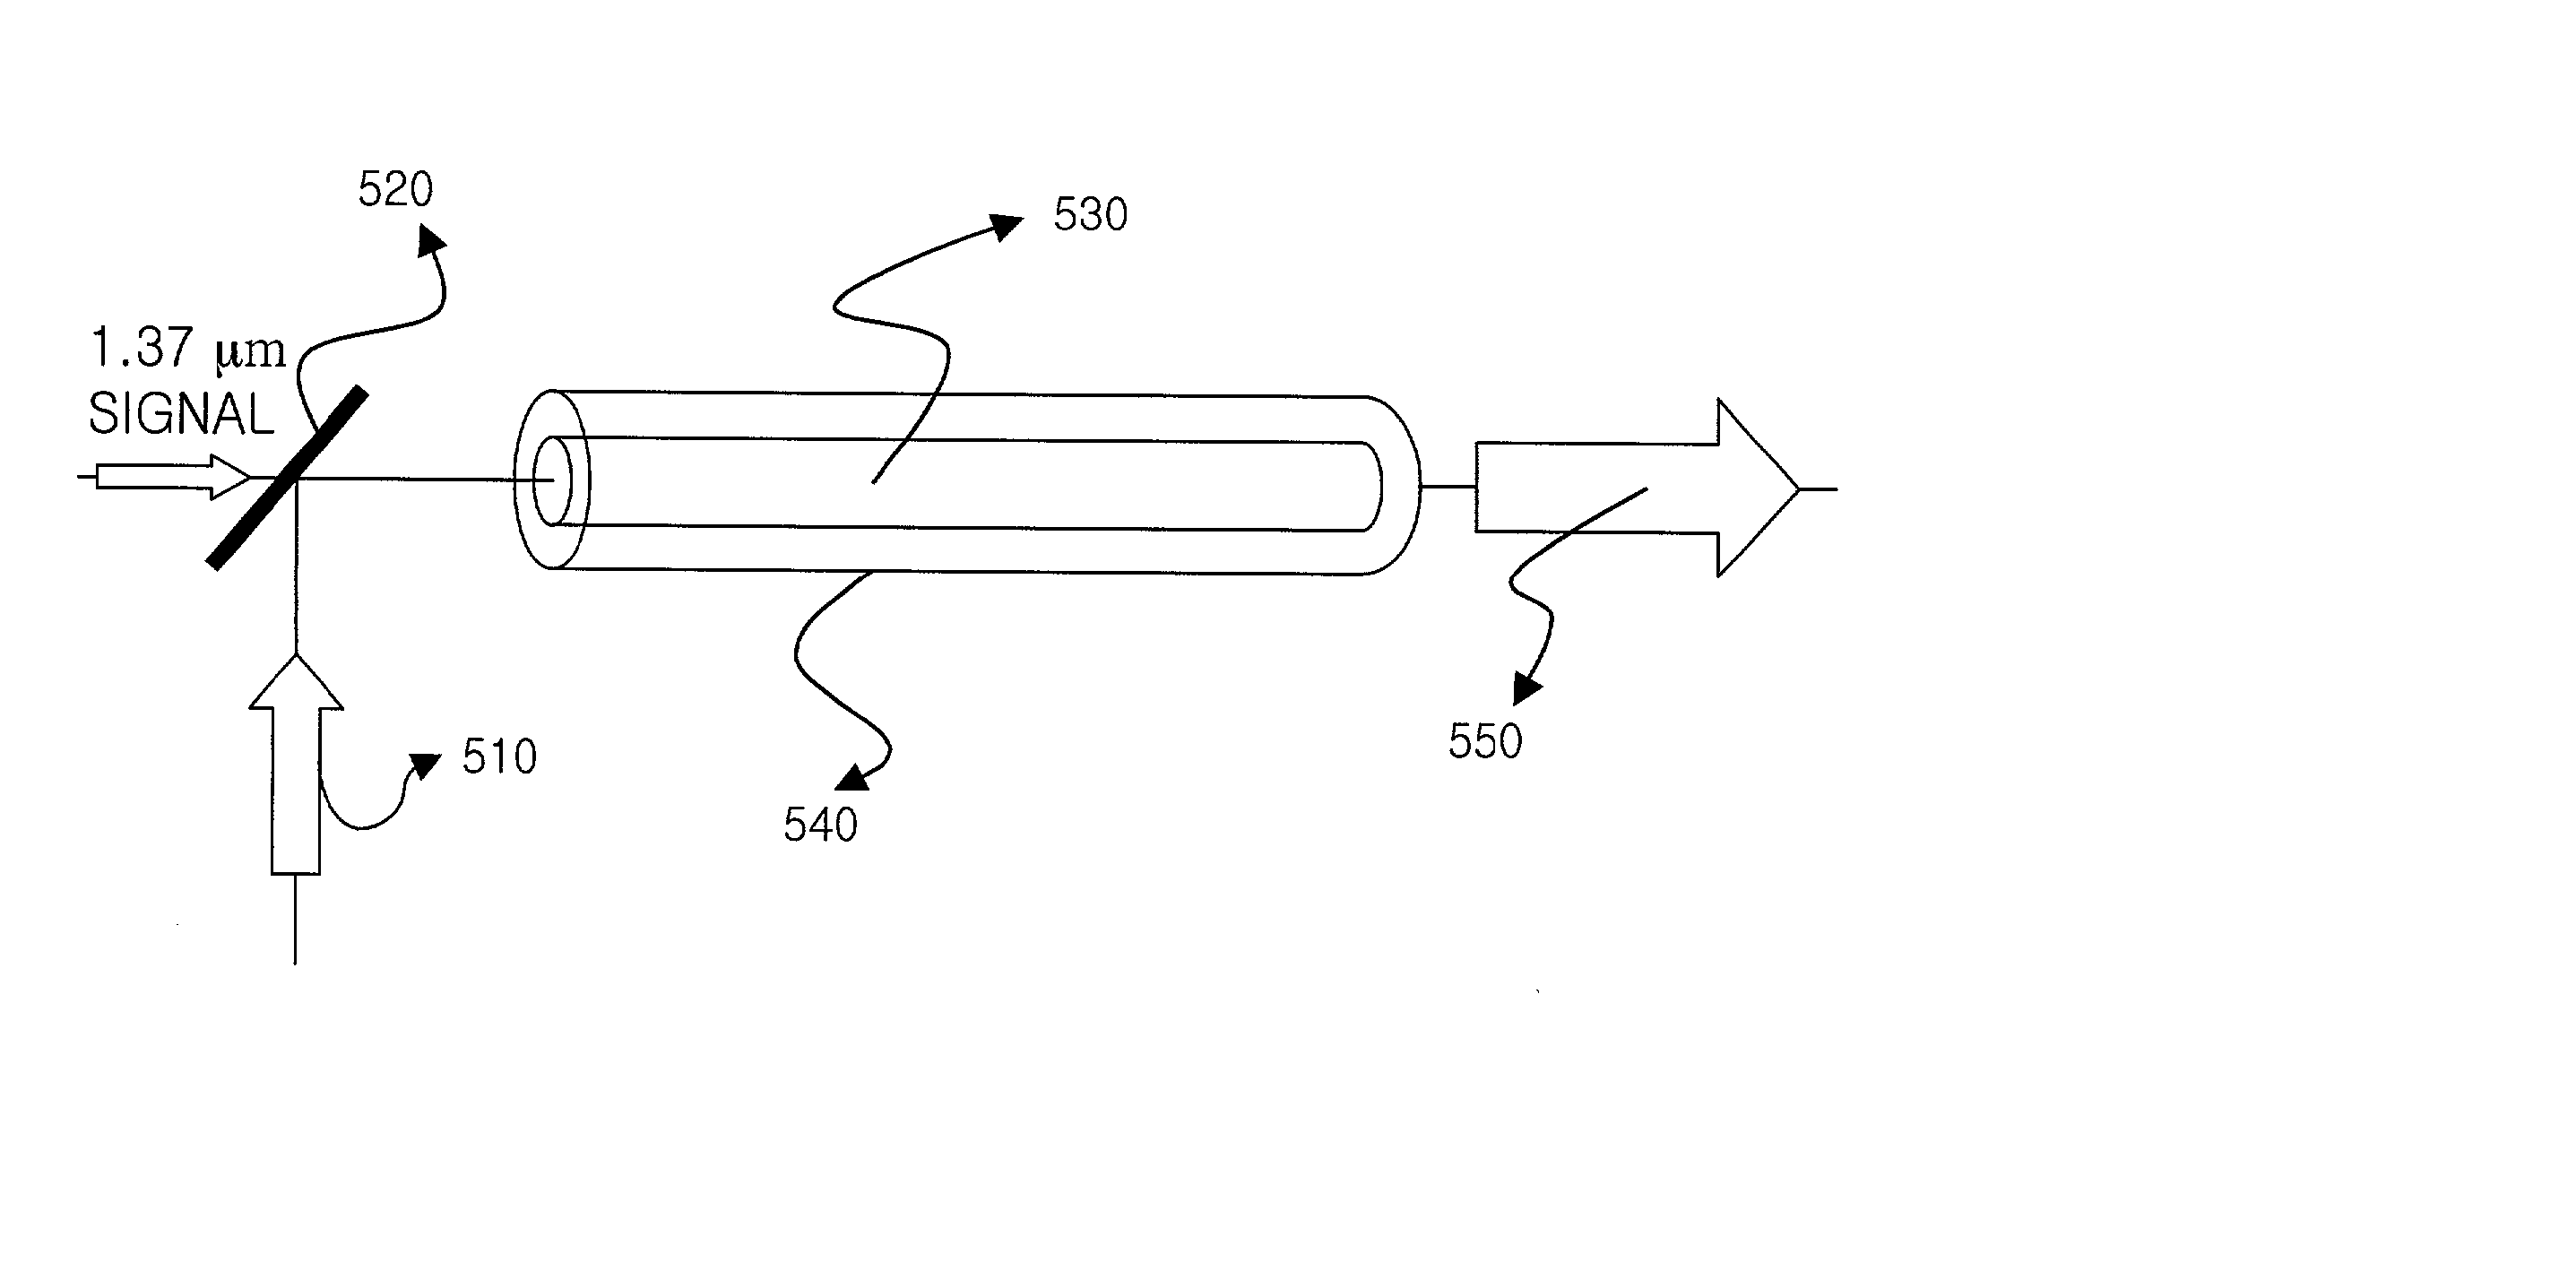 Optical amplifier incorporating therein holmium-doped optical fiber